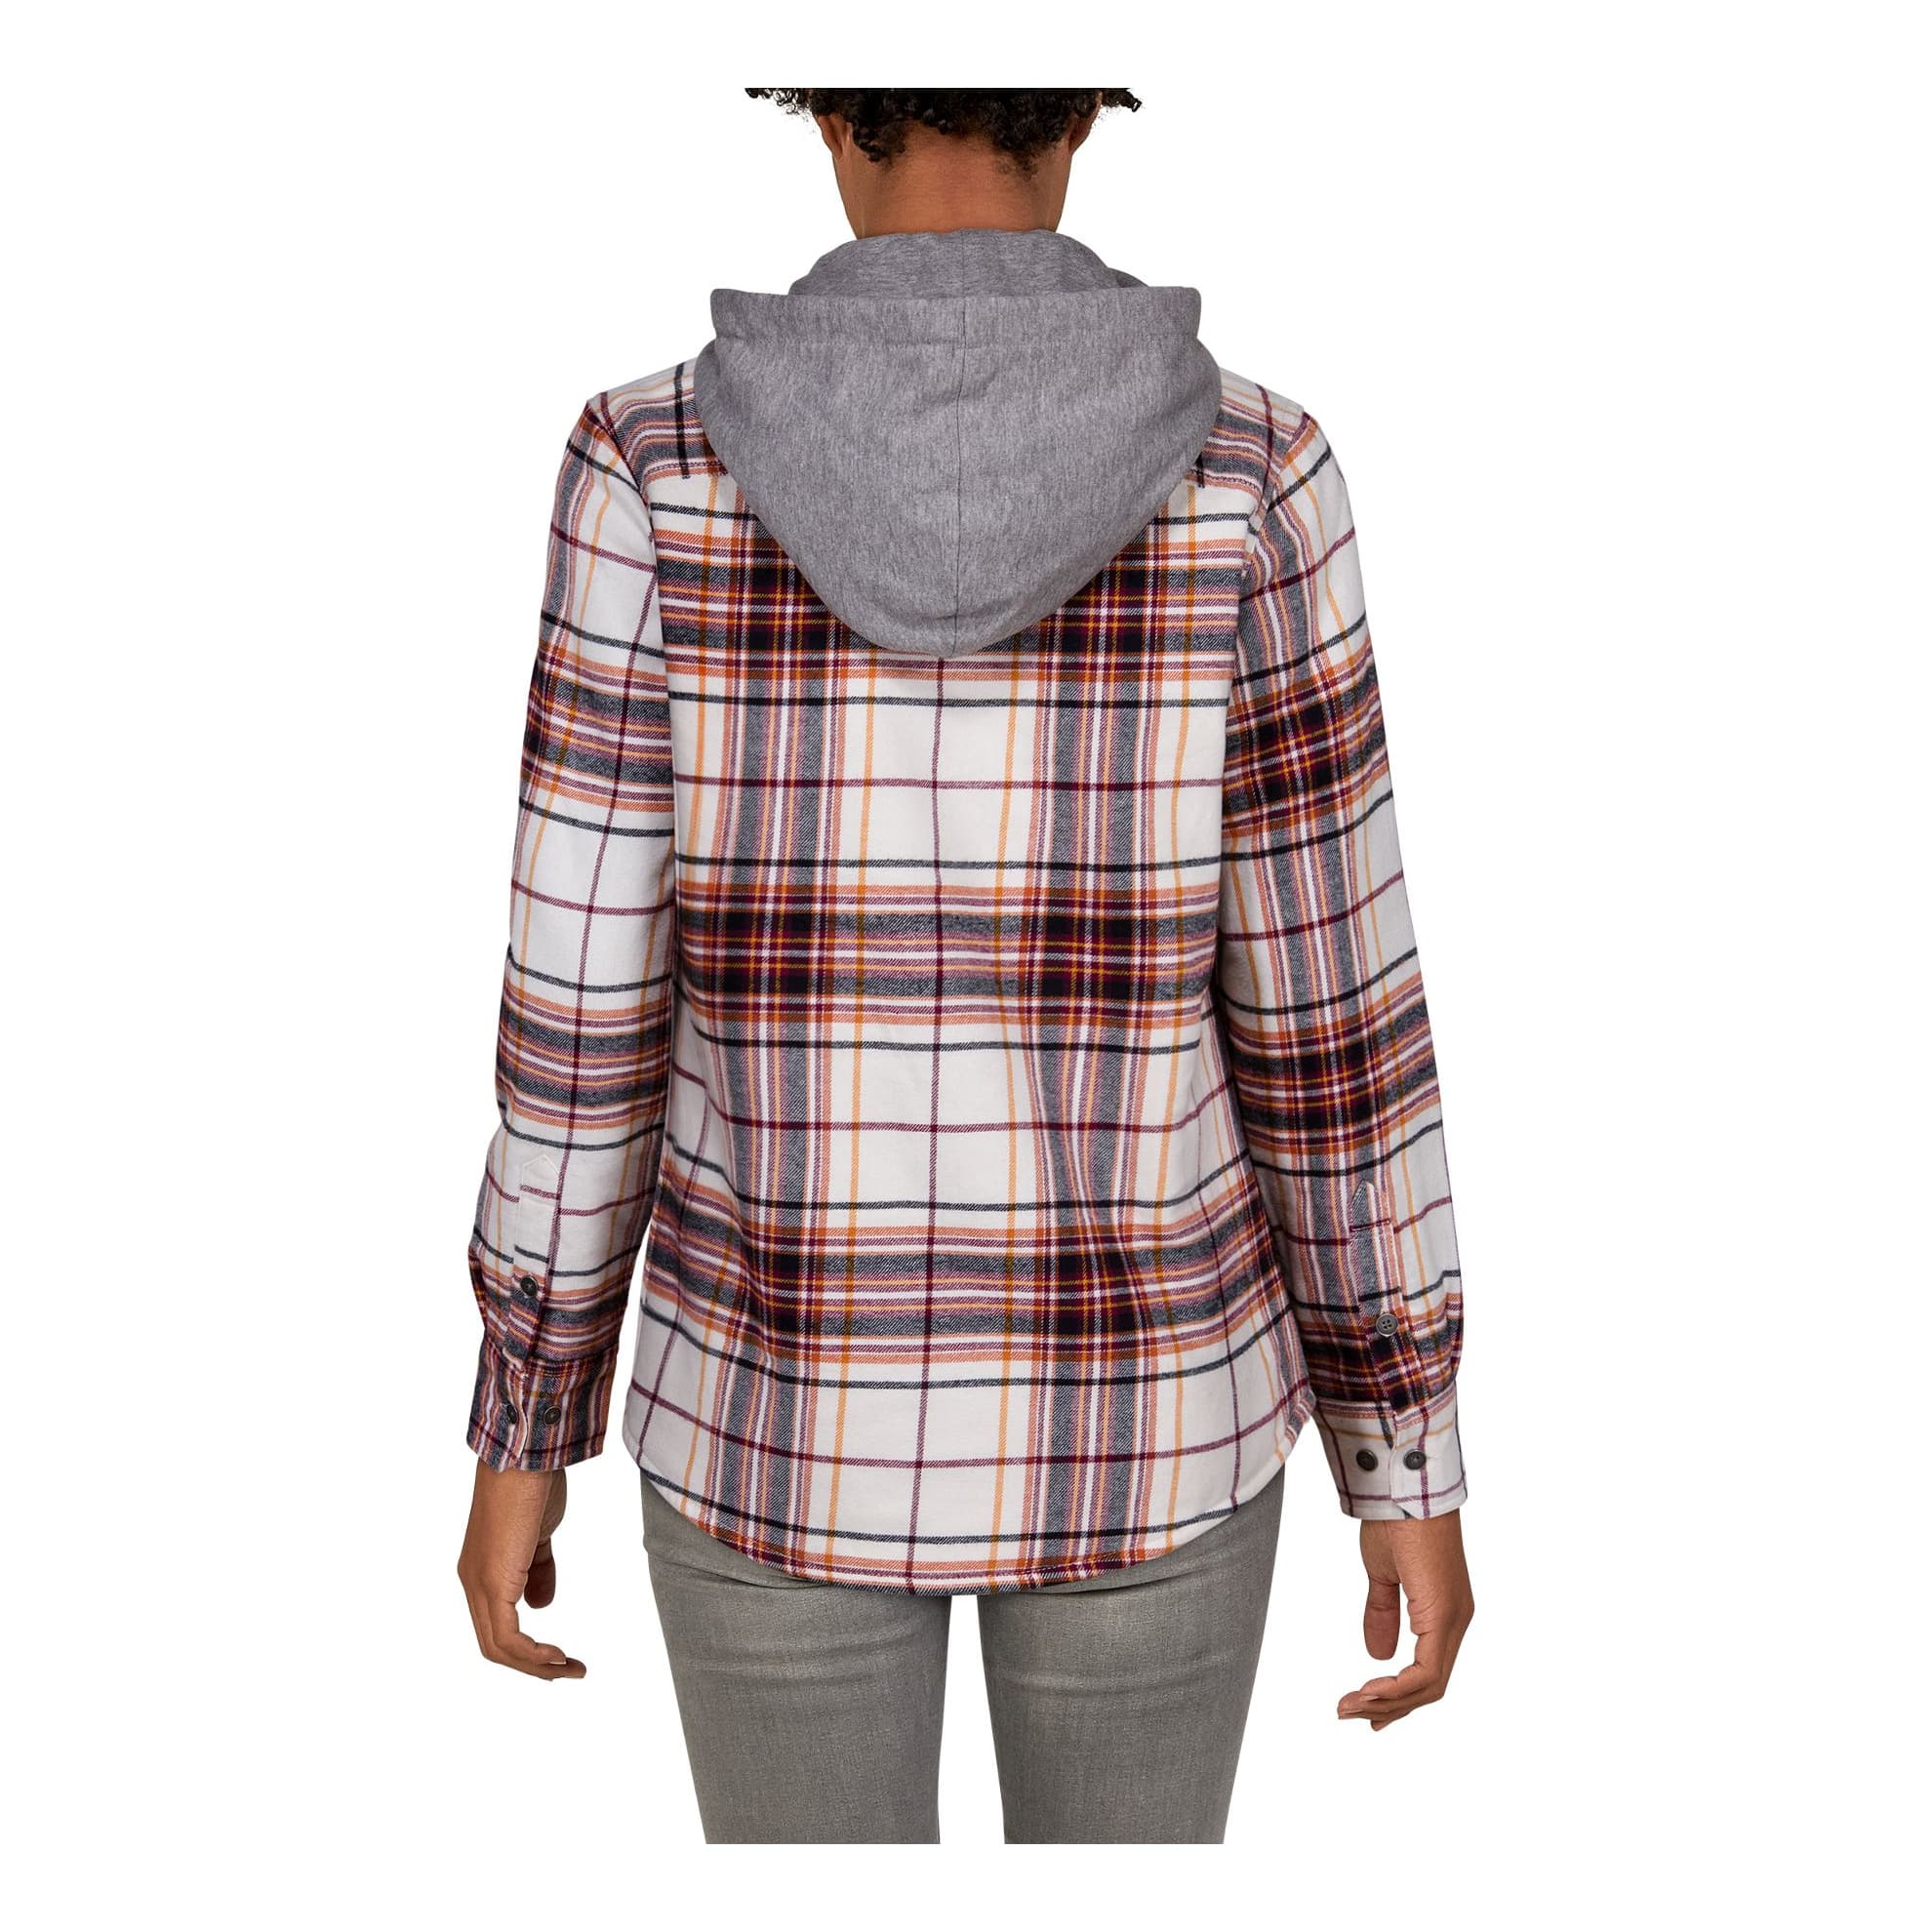 Natural Reflections Flannel Long-Sleeve Shirt Jacket - Burgundy Plaid - back,Natural Reflections Flannel Long-Sleeve Shirt Jacket - Burgundy Plaid - back